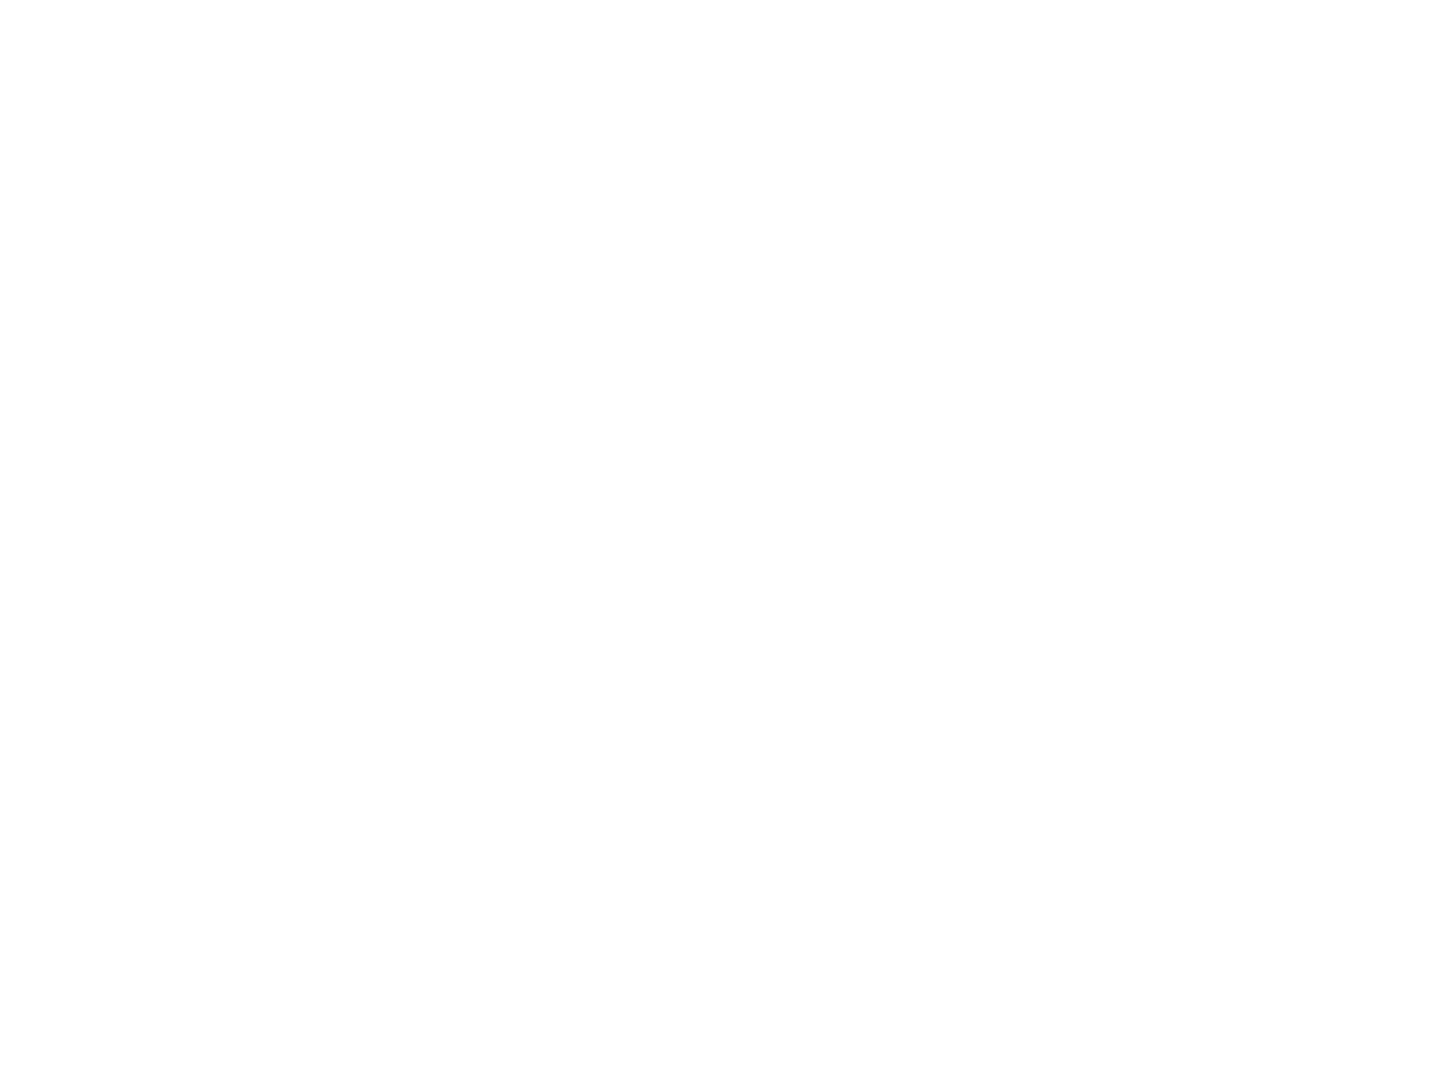 The Fortune is Blind logo. The black and white logo looks exotic and resembles a lost treasure map.